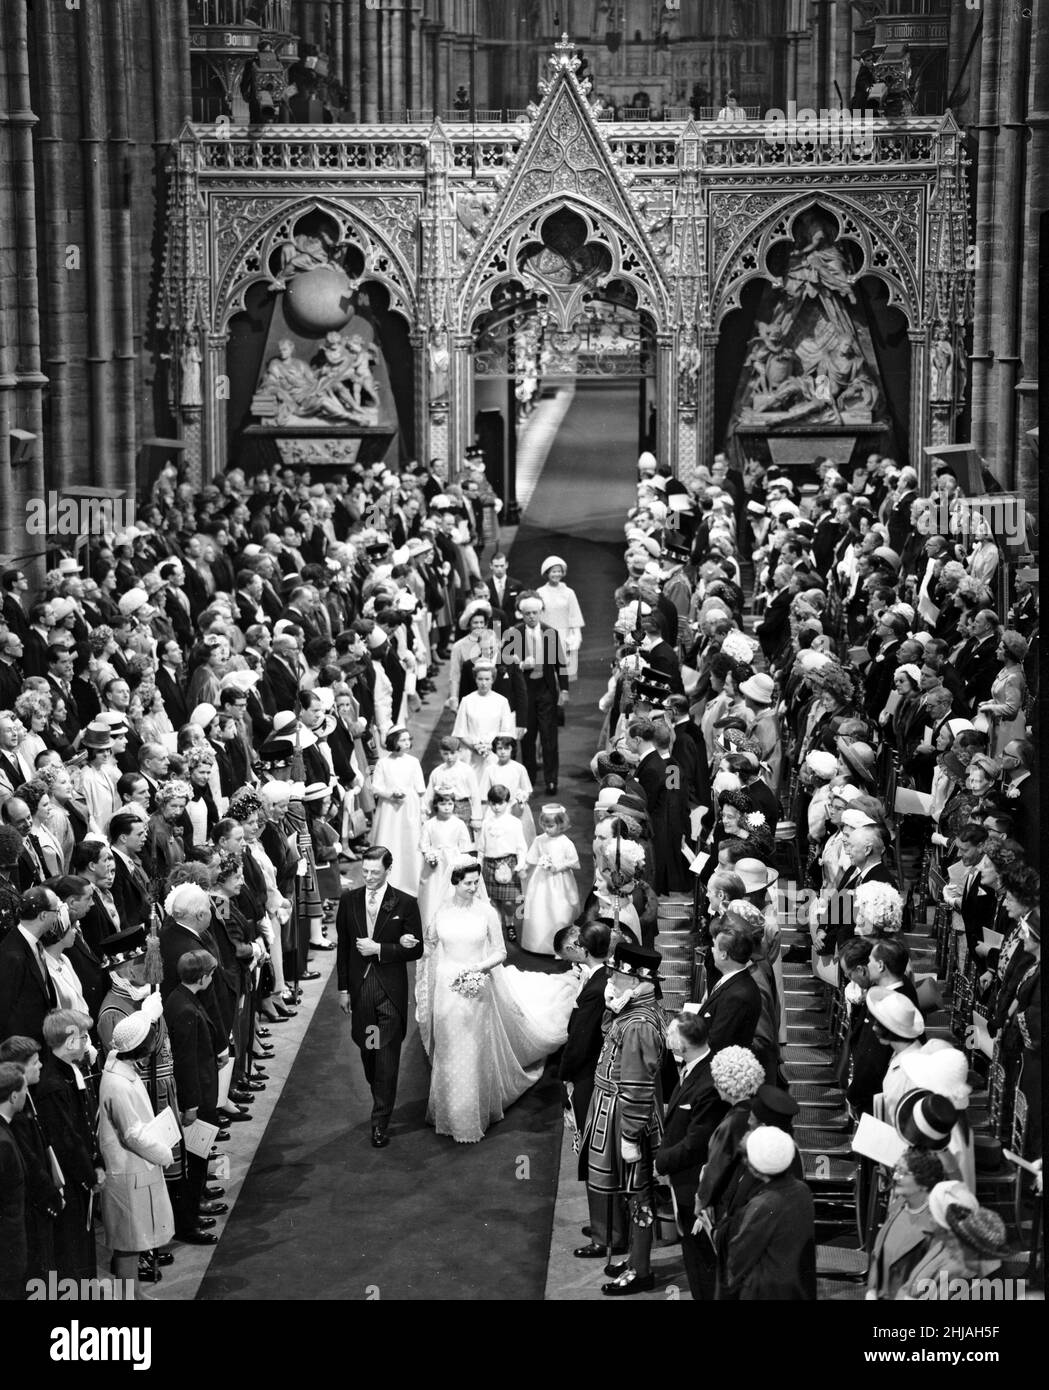 Sir Angus James Bruce Ogilvy and his bride Princess Alexandra of Kent, cousin to the queen seen here on their wedding day leaving Westminster Abbey, followed by their bridesmaids Princess Anne, Georgina Butters, Archduchess Elizabeth of Austria and page boy David Ogilvy. 23rd April 1963 Stock Photo